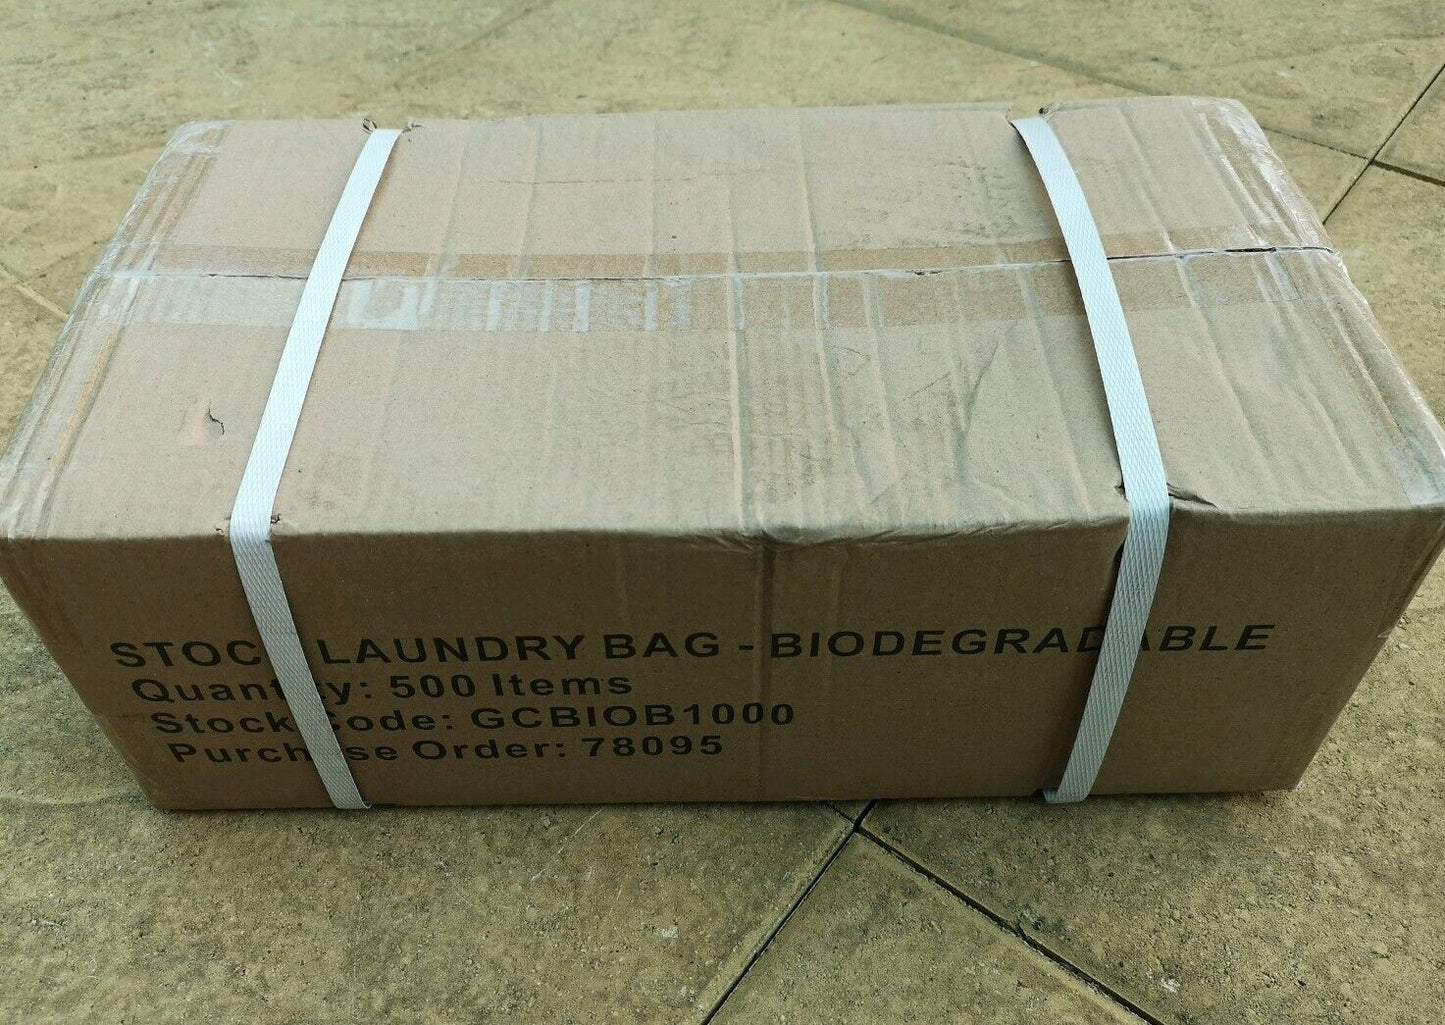 500x BIODEGRADABLE LAUNDRY BAG 16” x 22” / Hotels Bedroom Supplies